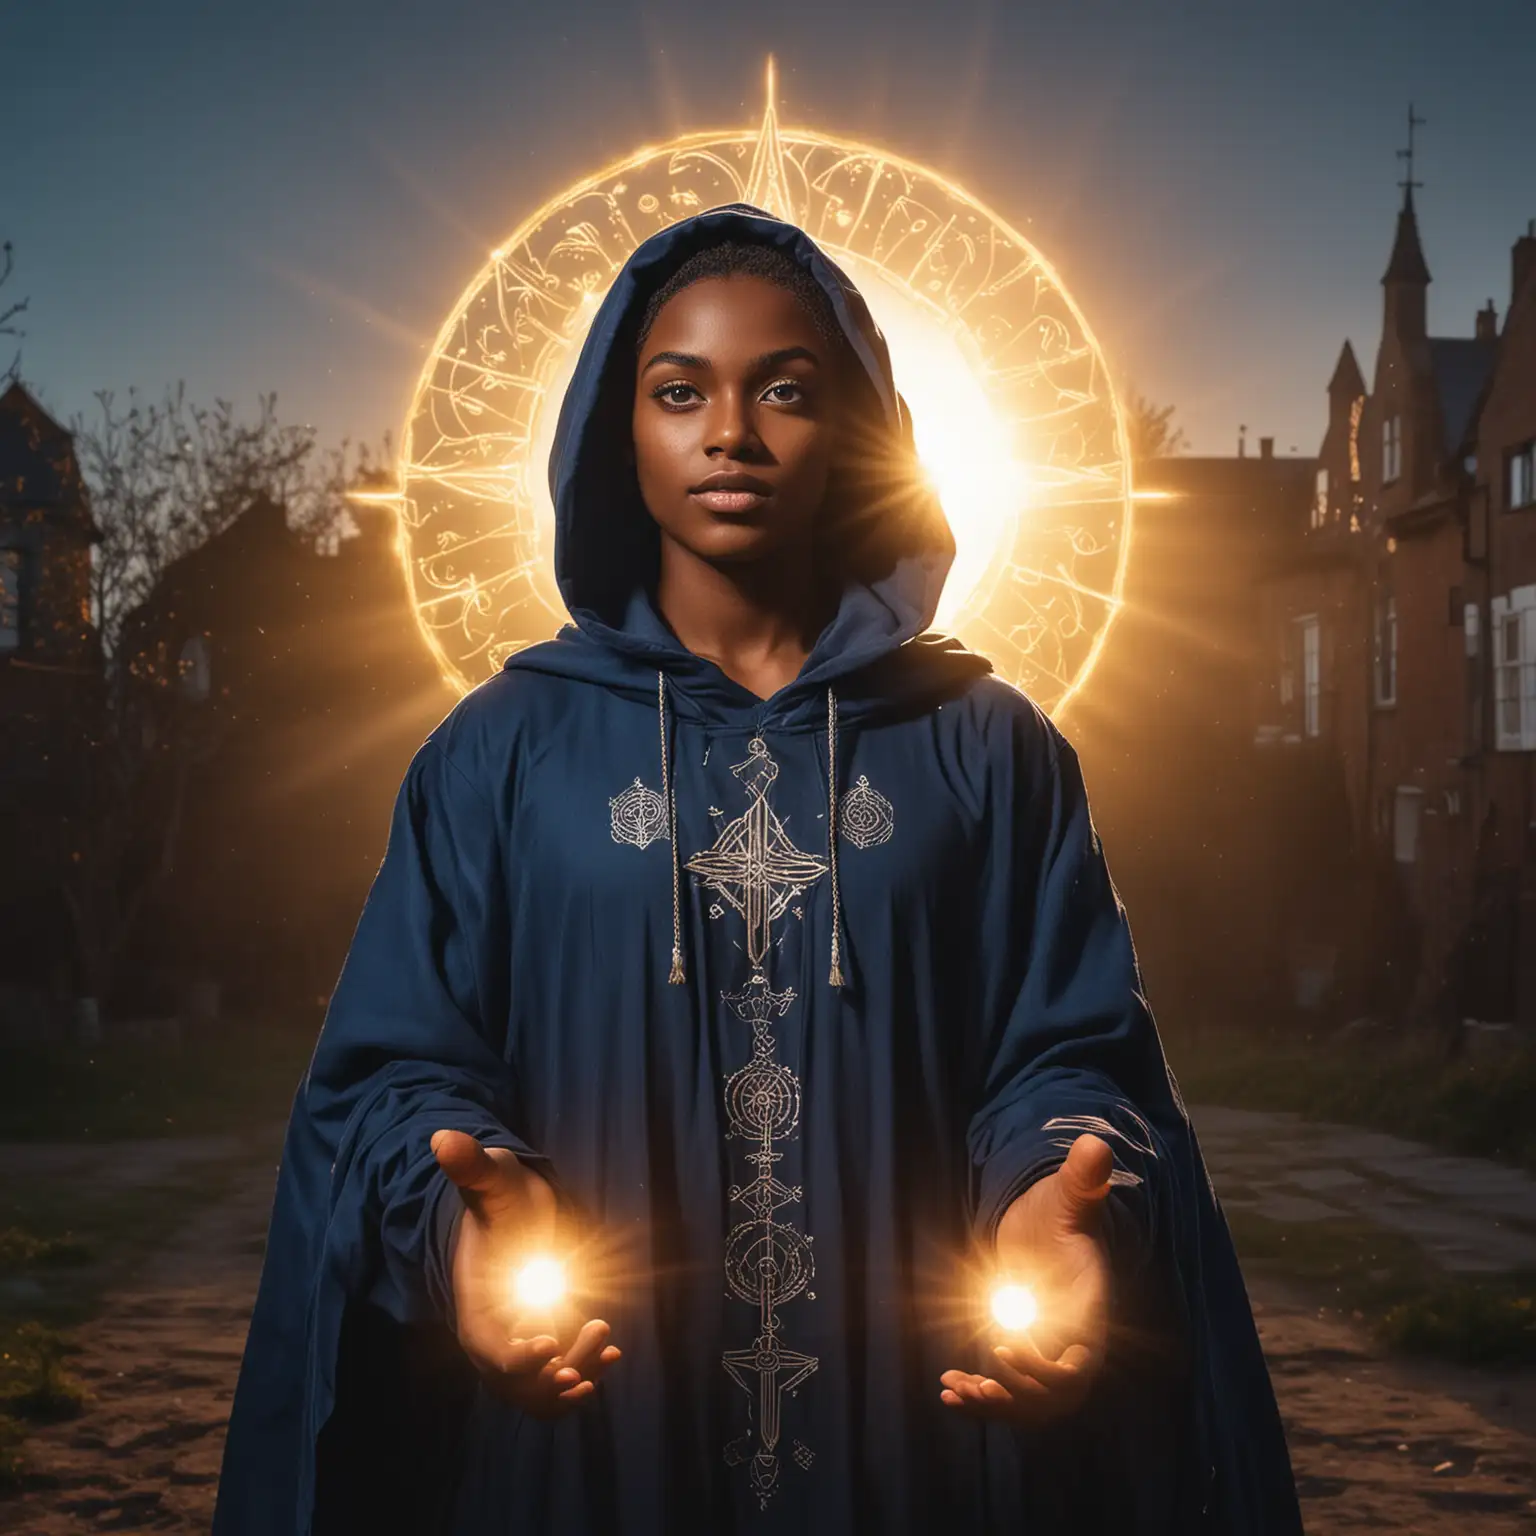 Tall dark skinned androgynous being with light blue eyes, dressed in a dark blue hooded wizard robe with shining silver geometric symbols on it,  standing with arms outreached with a bright golden sun behind it.